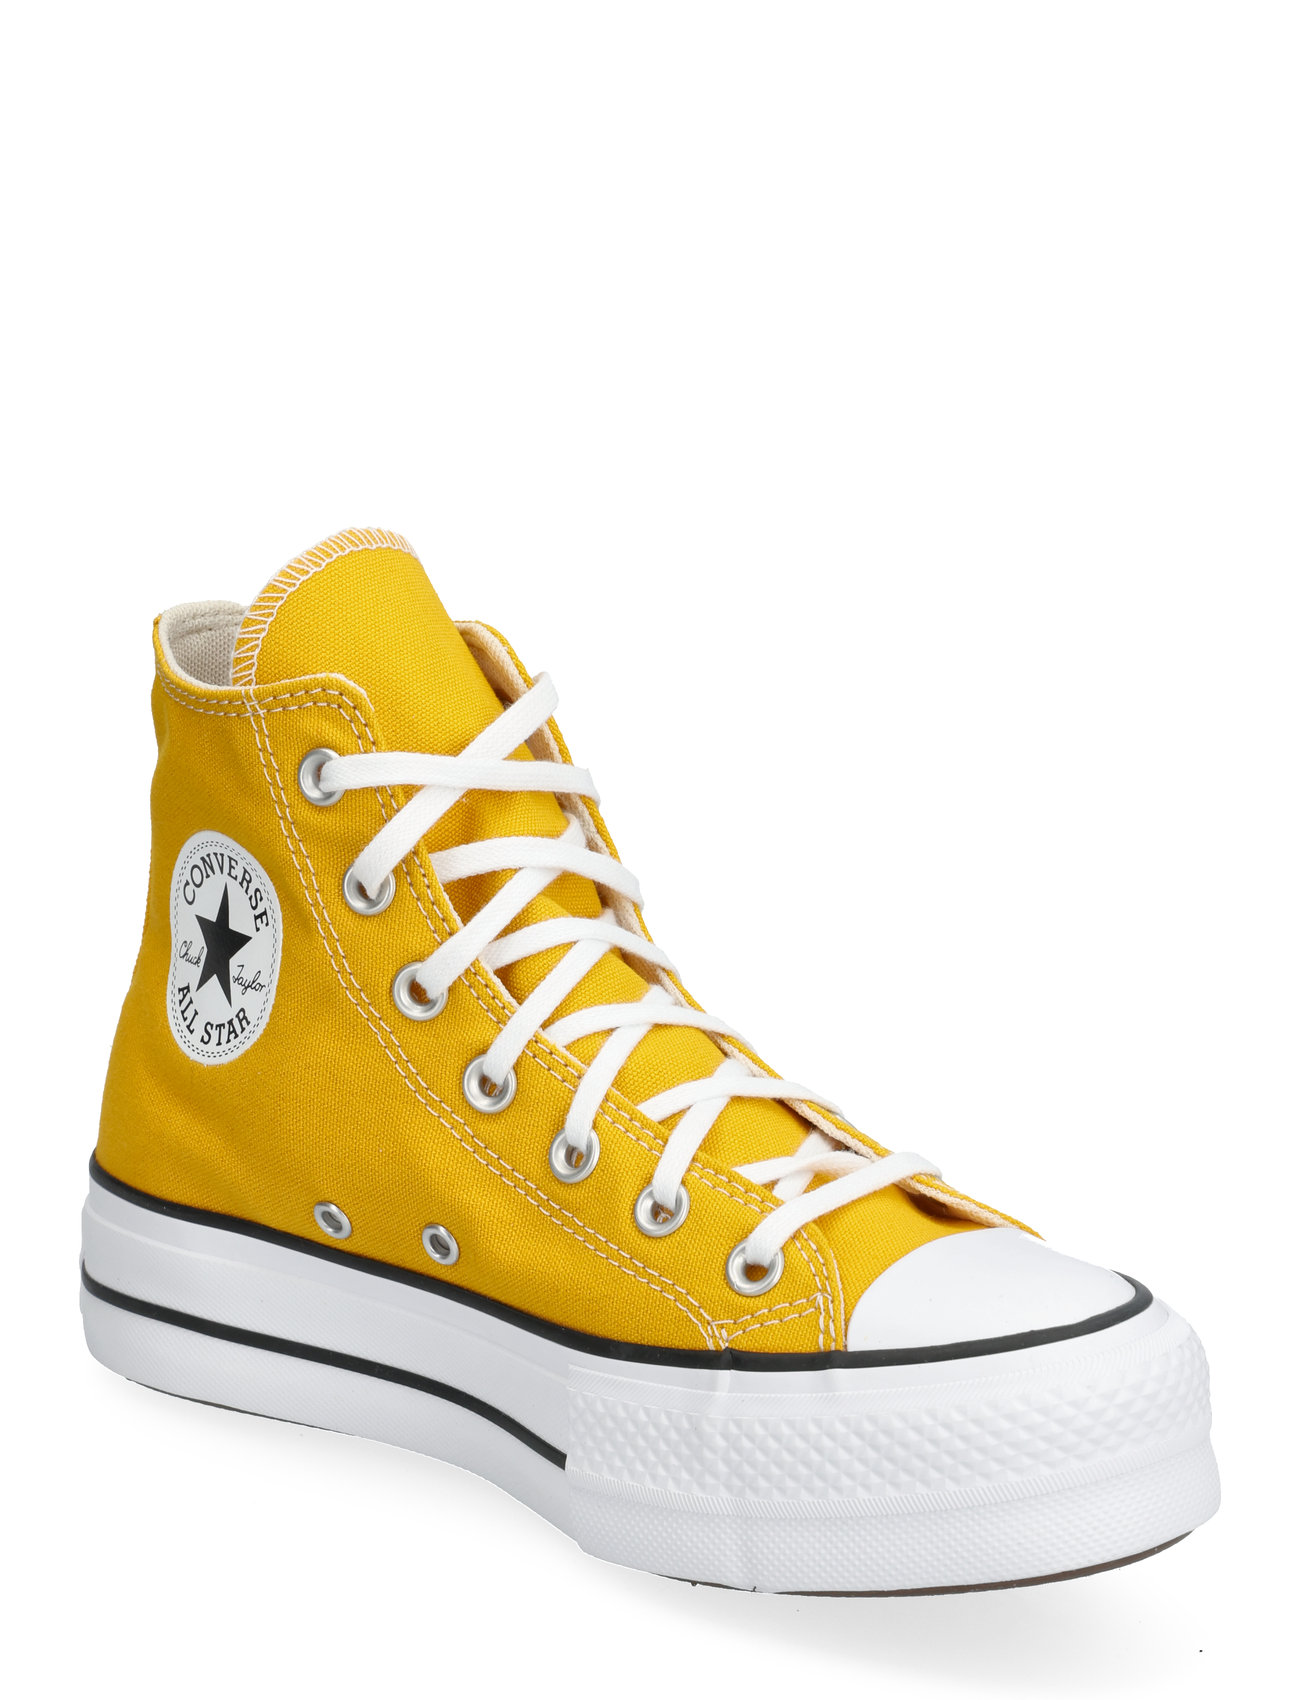 Converse "Chuck Taylor All Star Lift High-top Sneakers Yellow Converse"